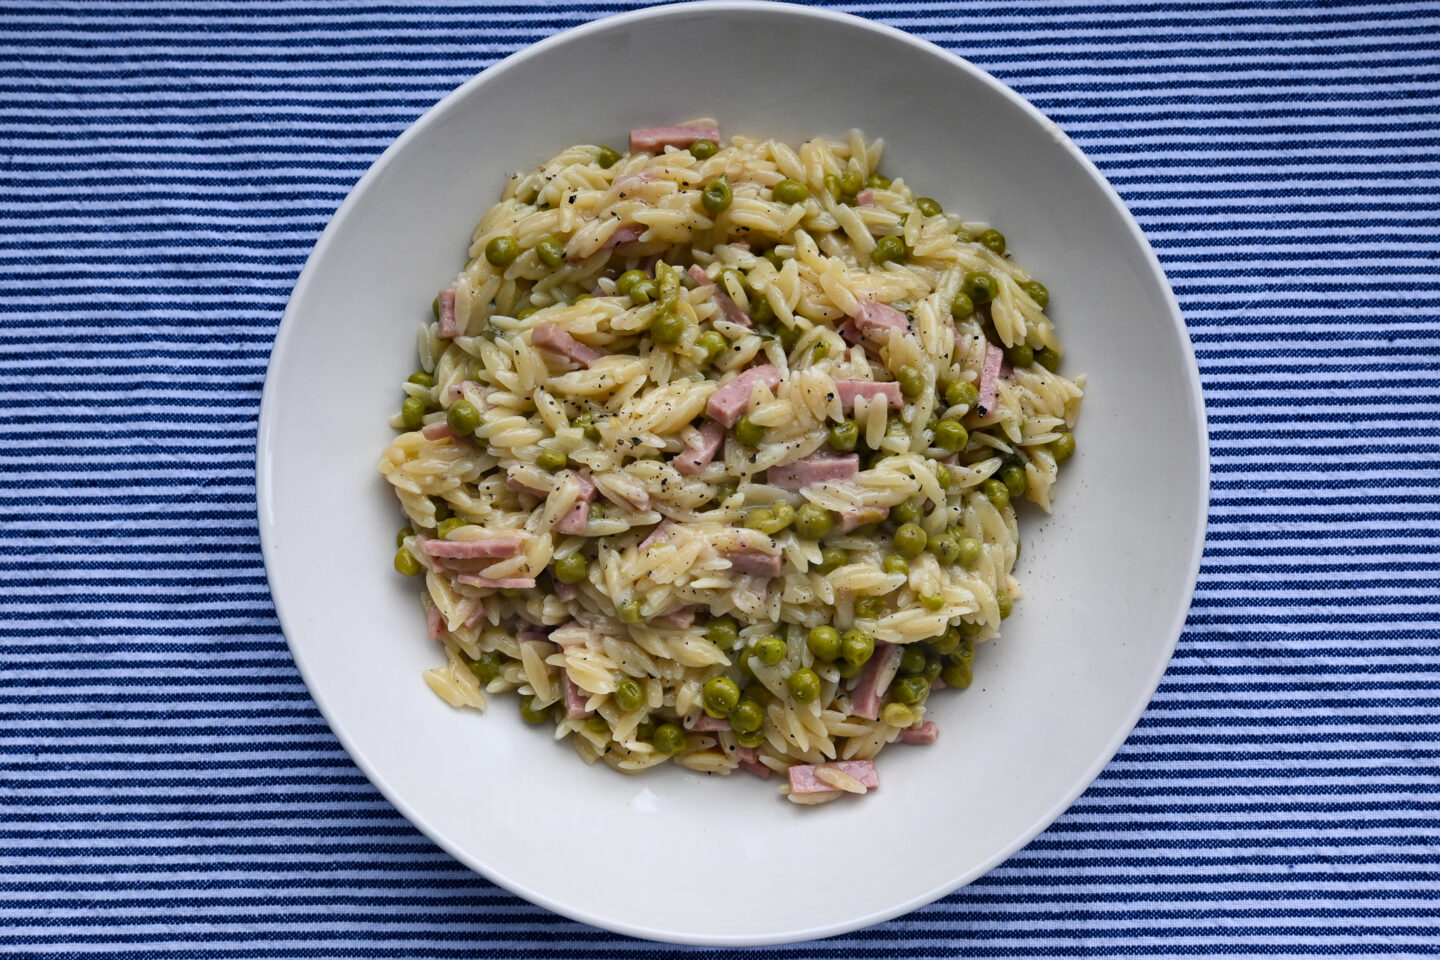 bowl of orzo, ham cubes & peas on a blue and white striped background